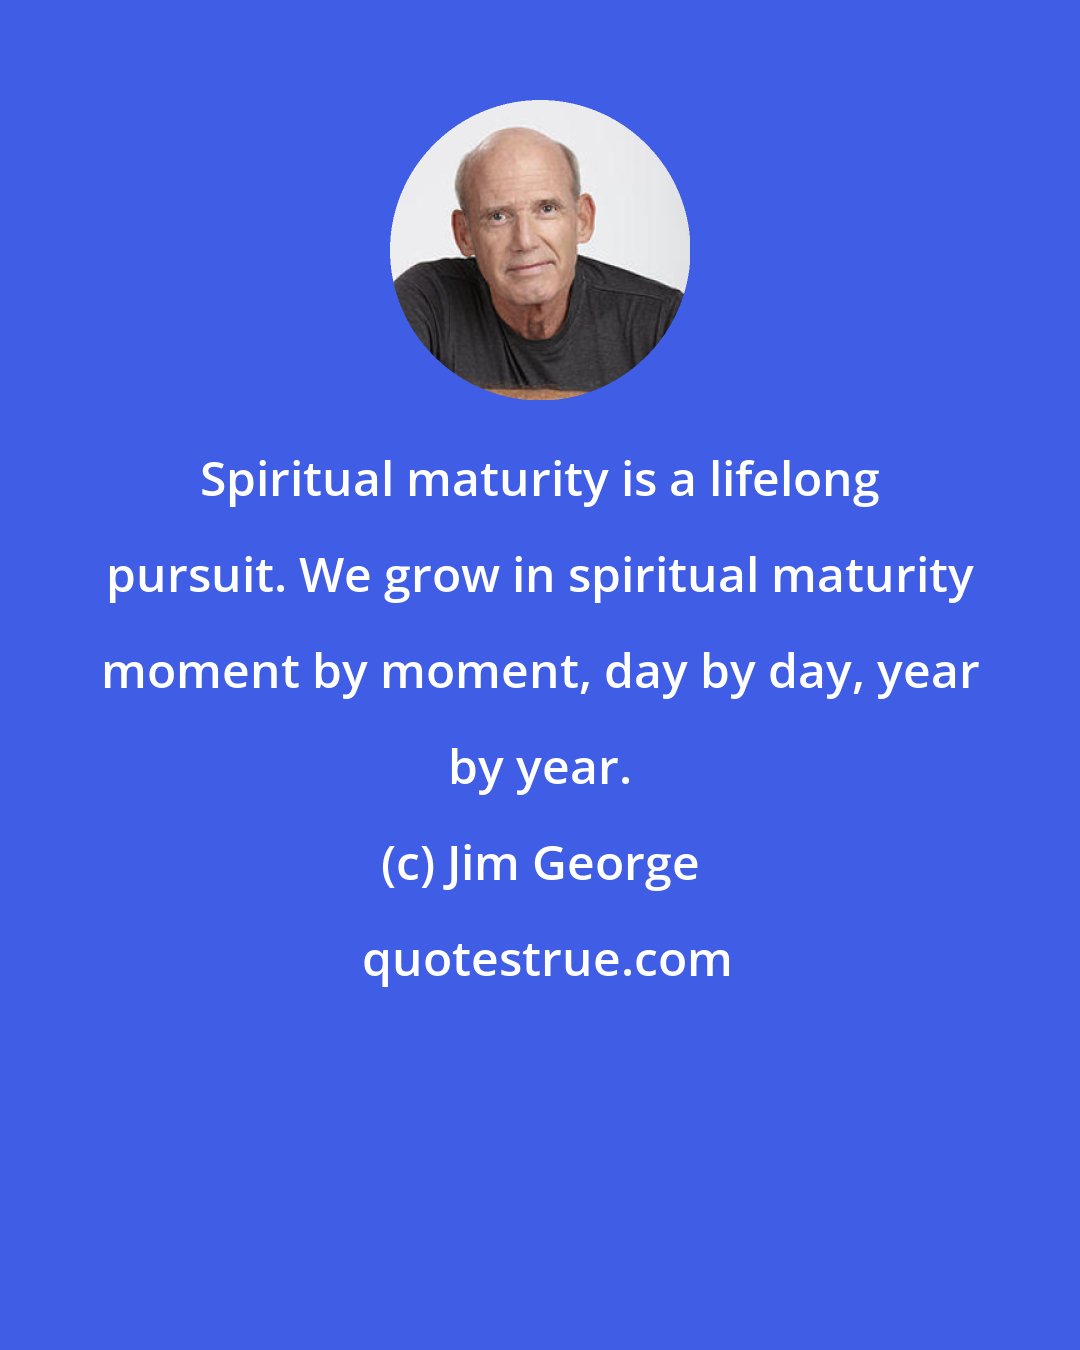 Jim George: Spiritual maturity is a lifelong pursuit. We grow in spiritual maturity moment by moment, day by day, year by year.